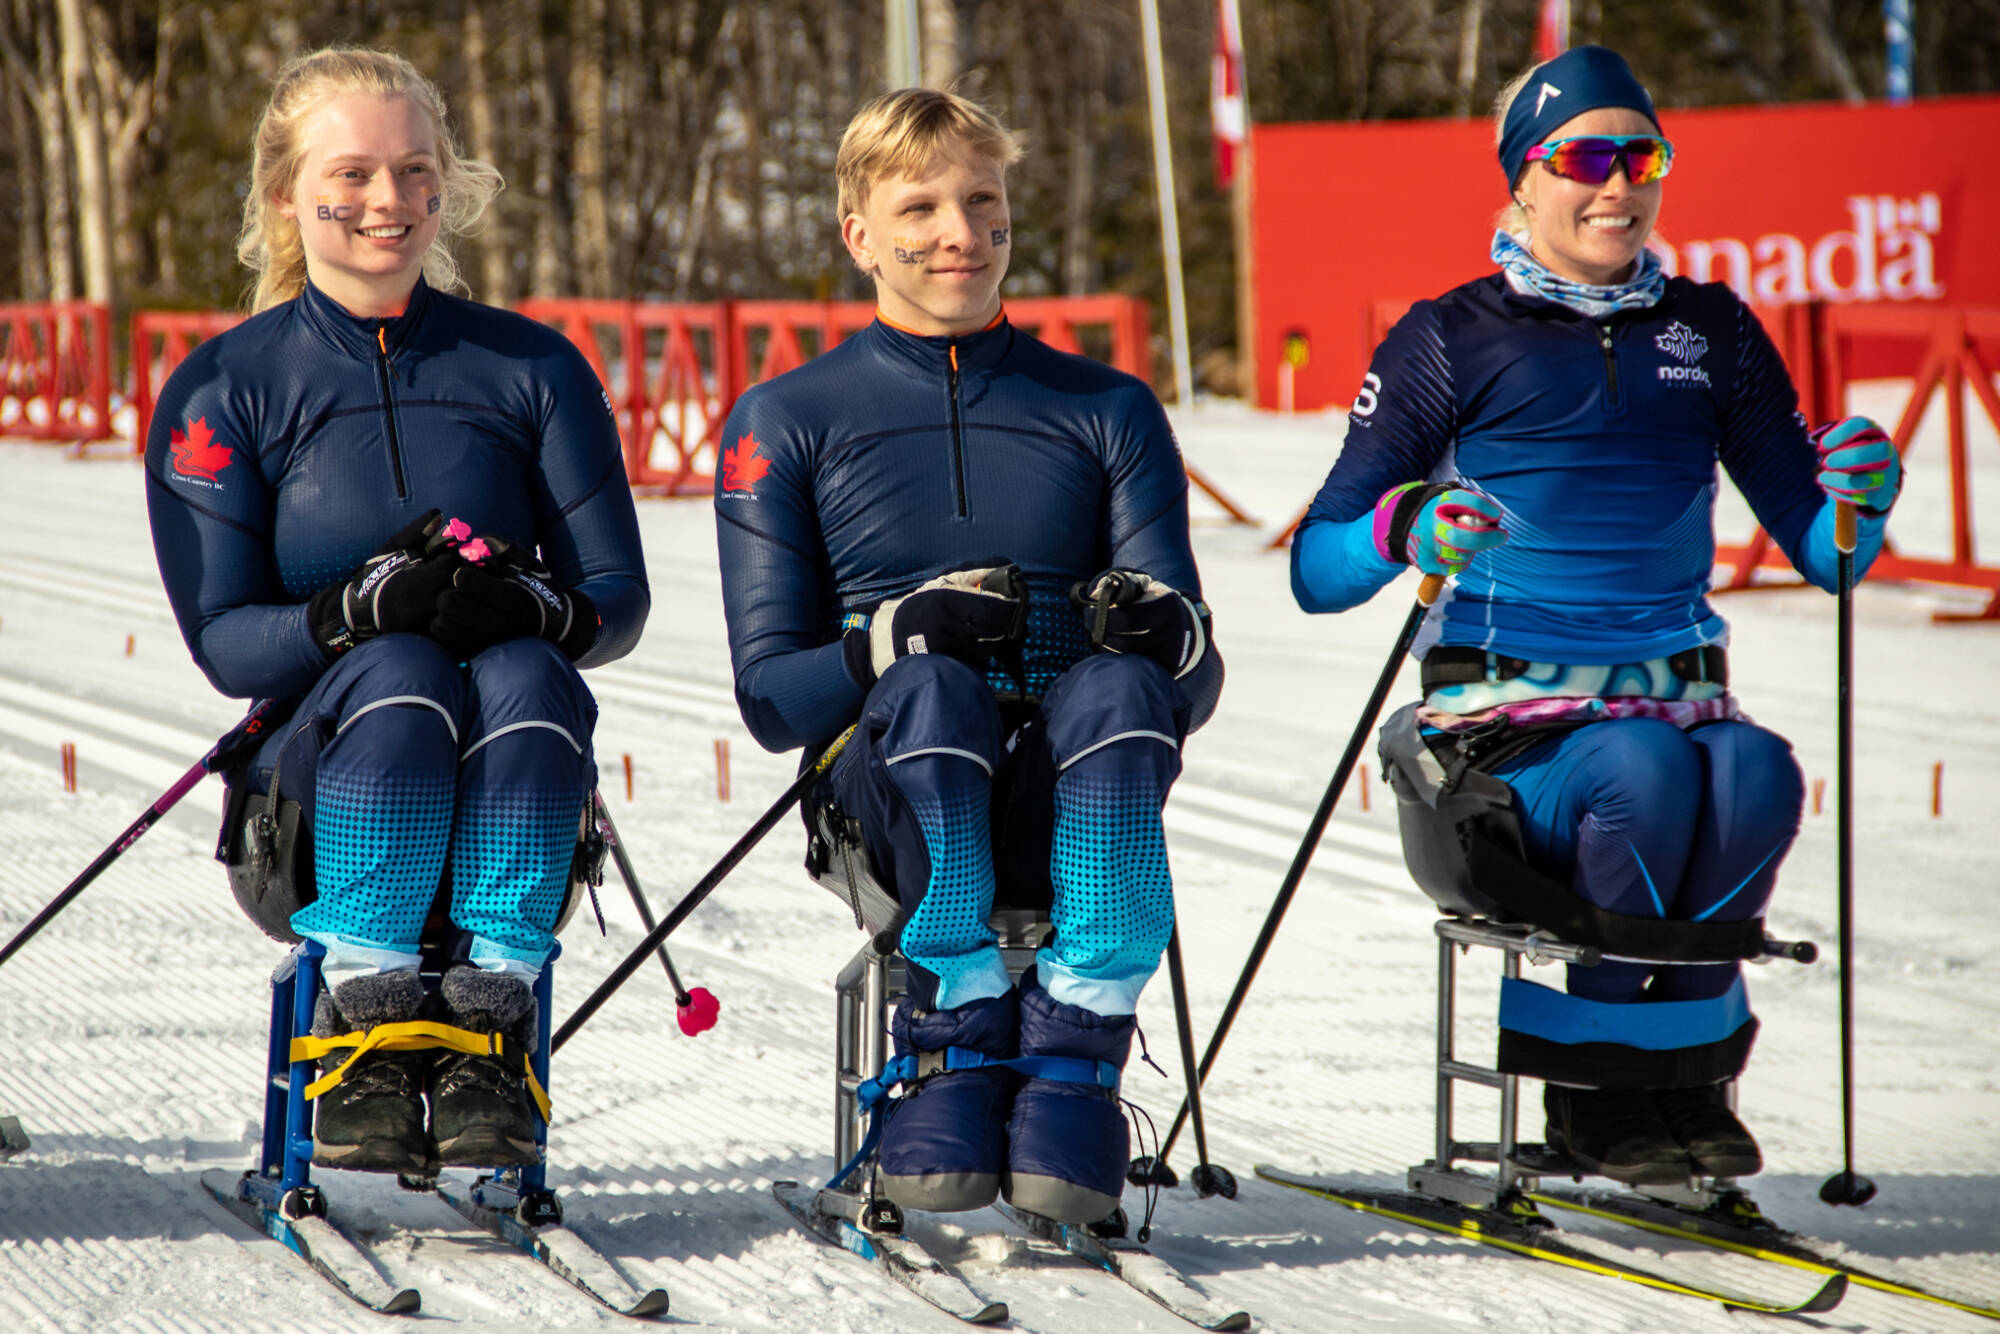 Salmon Arm’s Lily Brook and Kaden Baum, at left, take time out during their medal-winning performances at the 2023 Canada Winter Games in PEI. (Photo courtesy of Paul Klements)